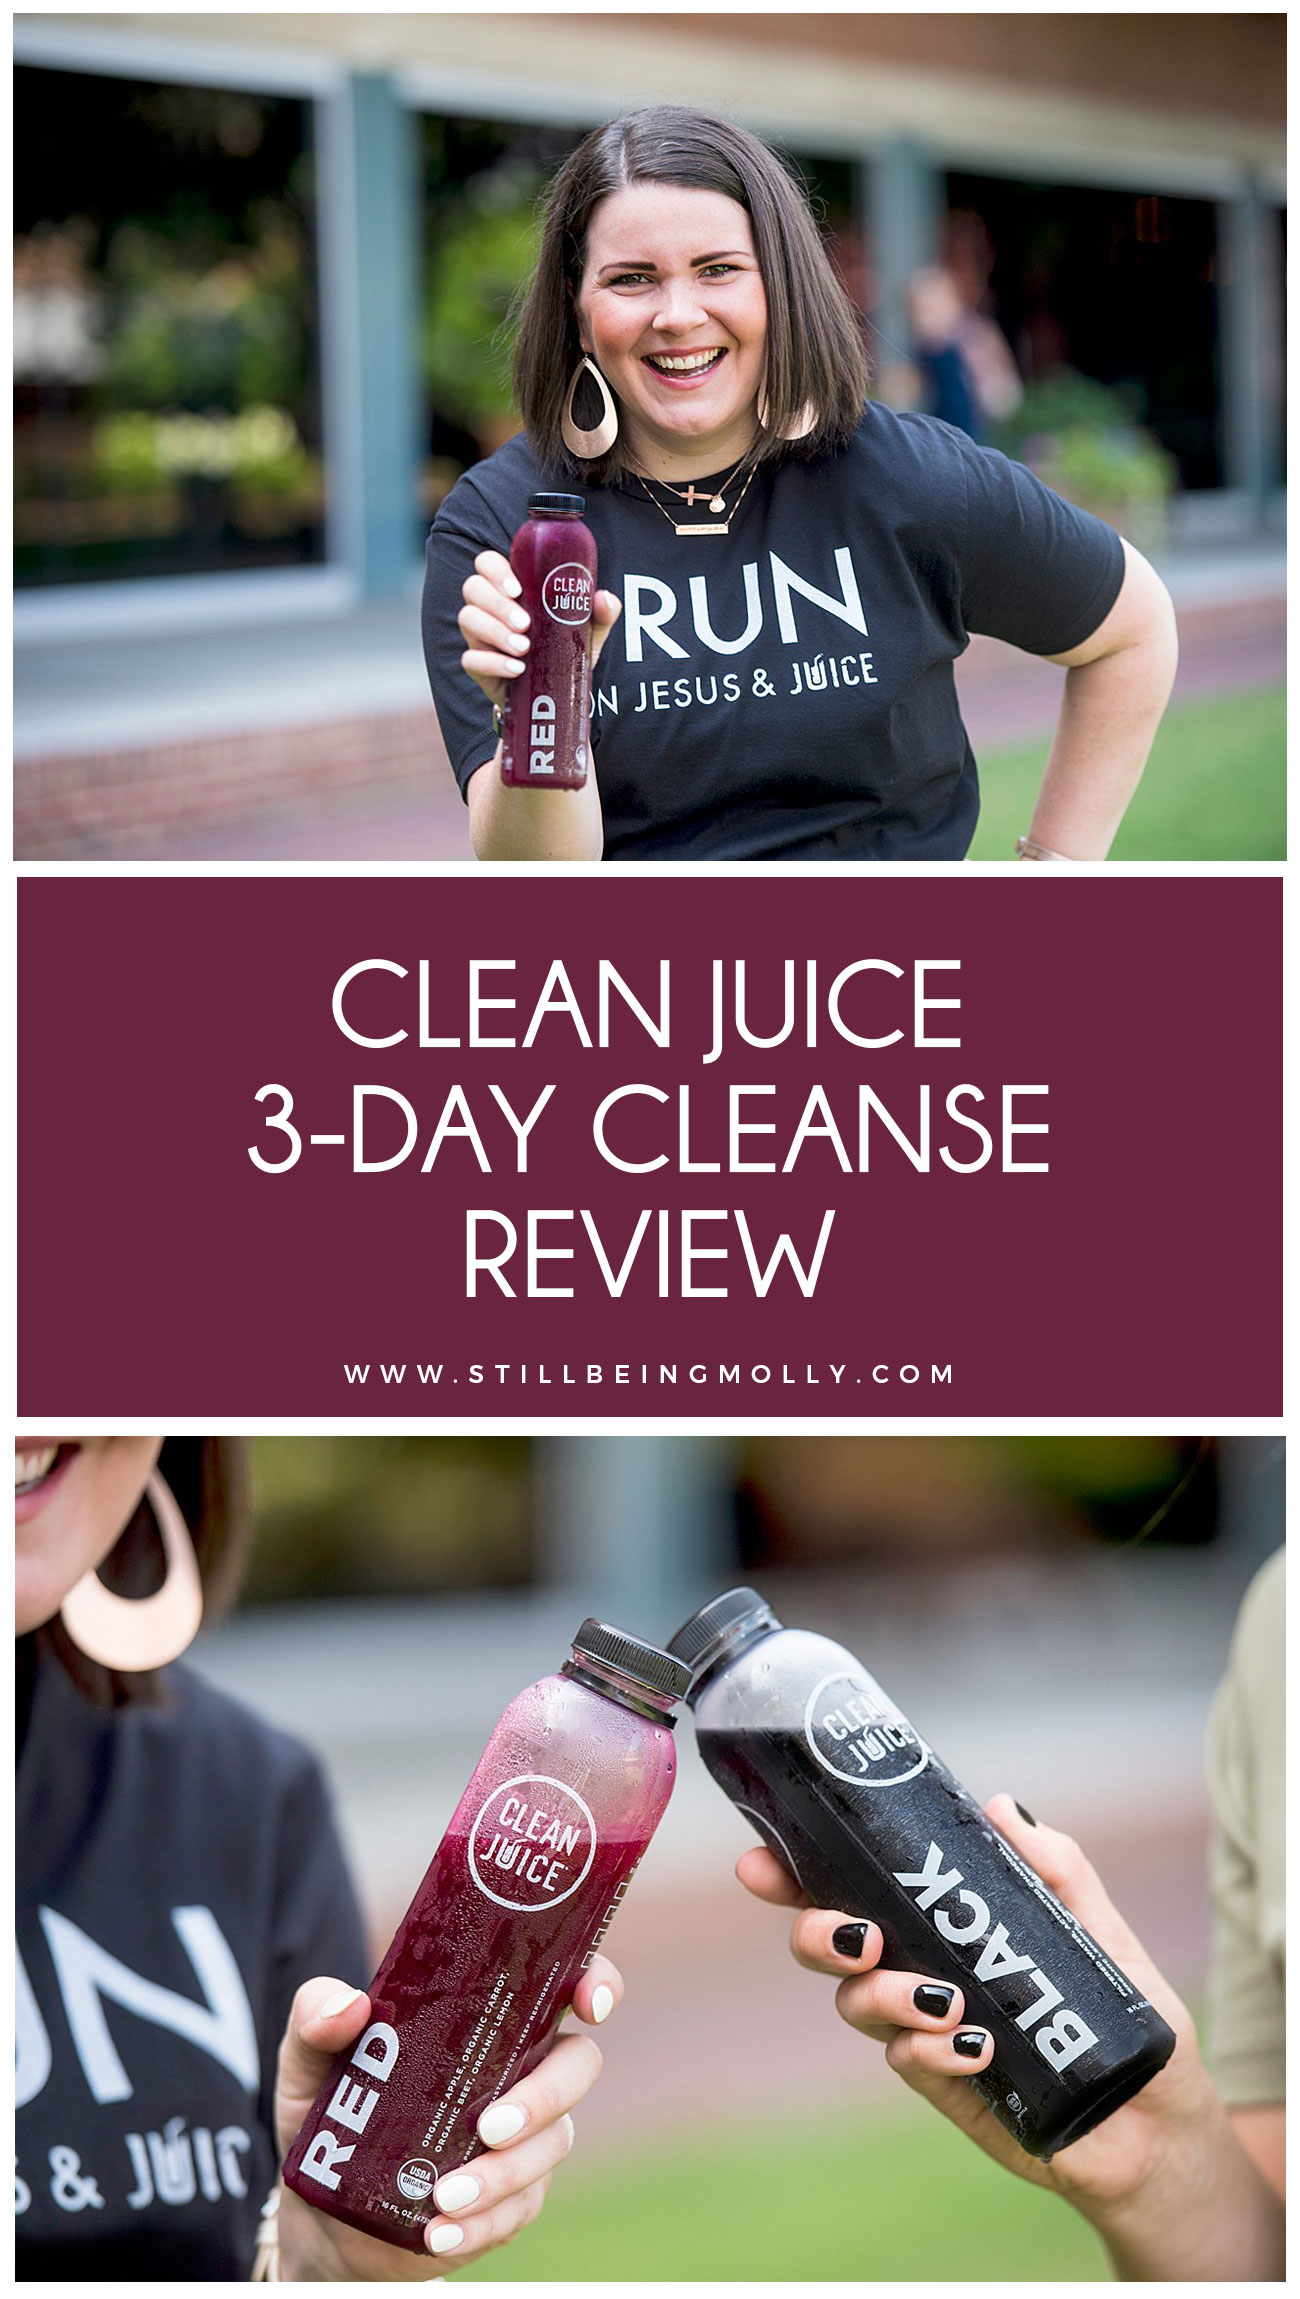 I Tried One of Those Clean Juice Cleanses and Here Are My Thoughts... Clean Juice 3-Day Juice Cleanse Review (4)